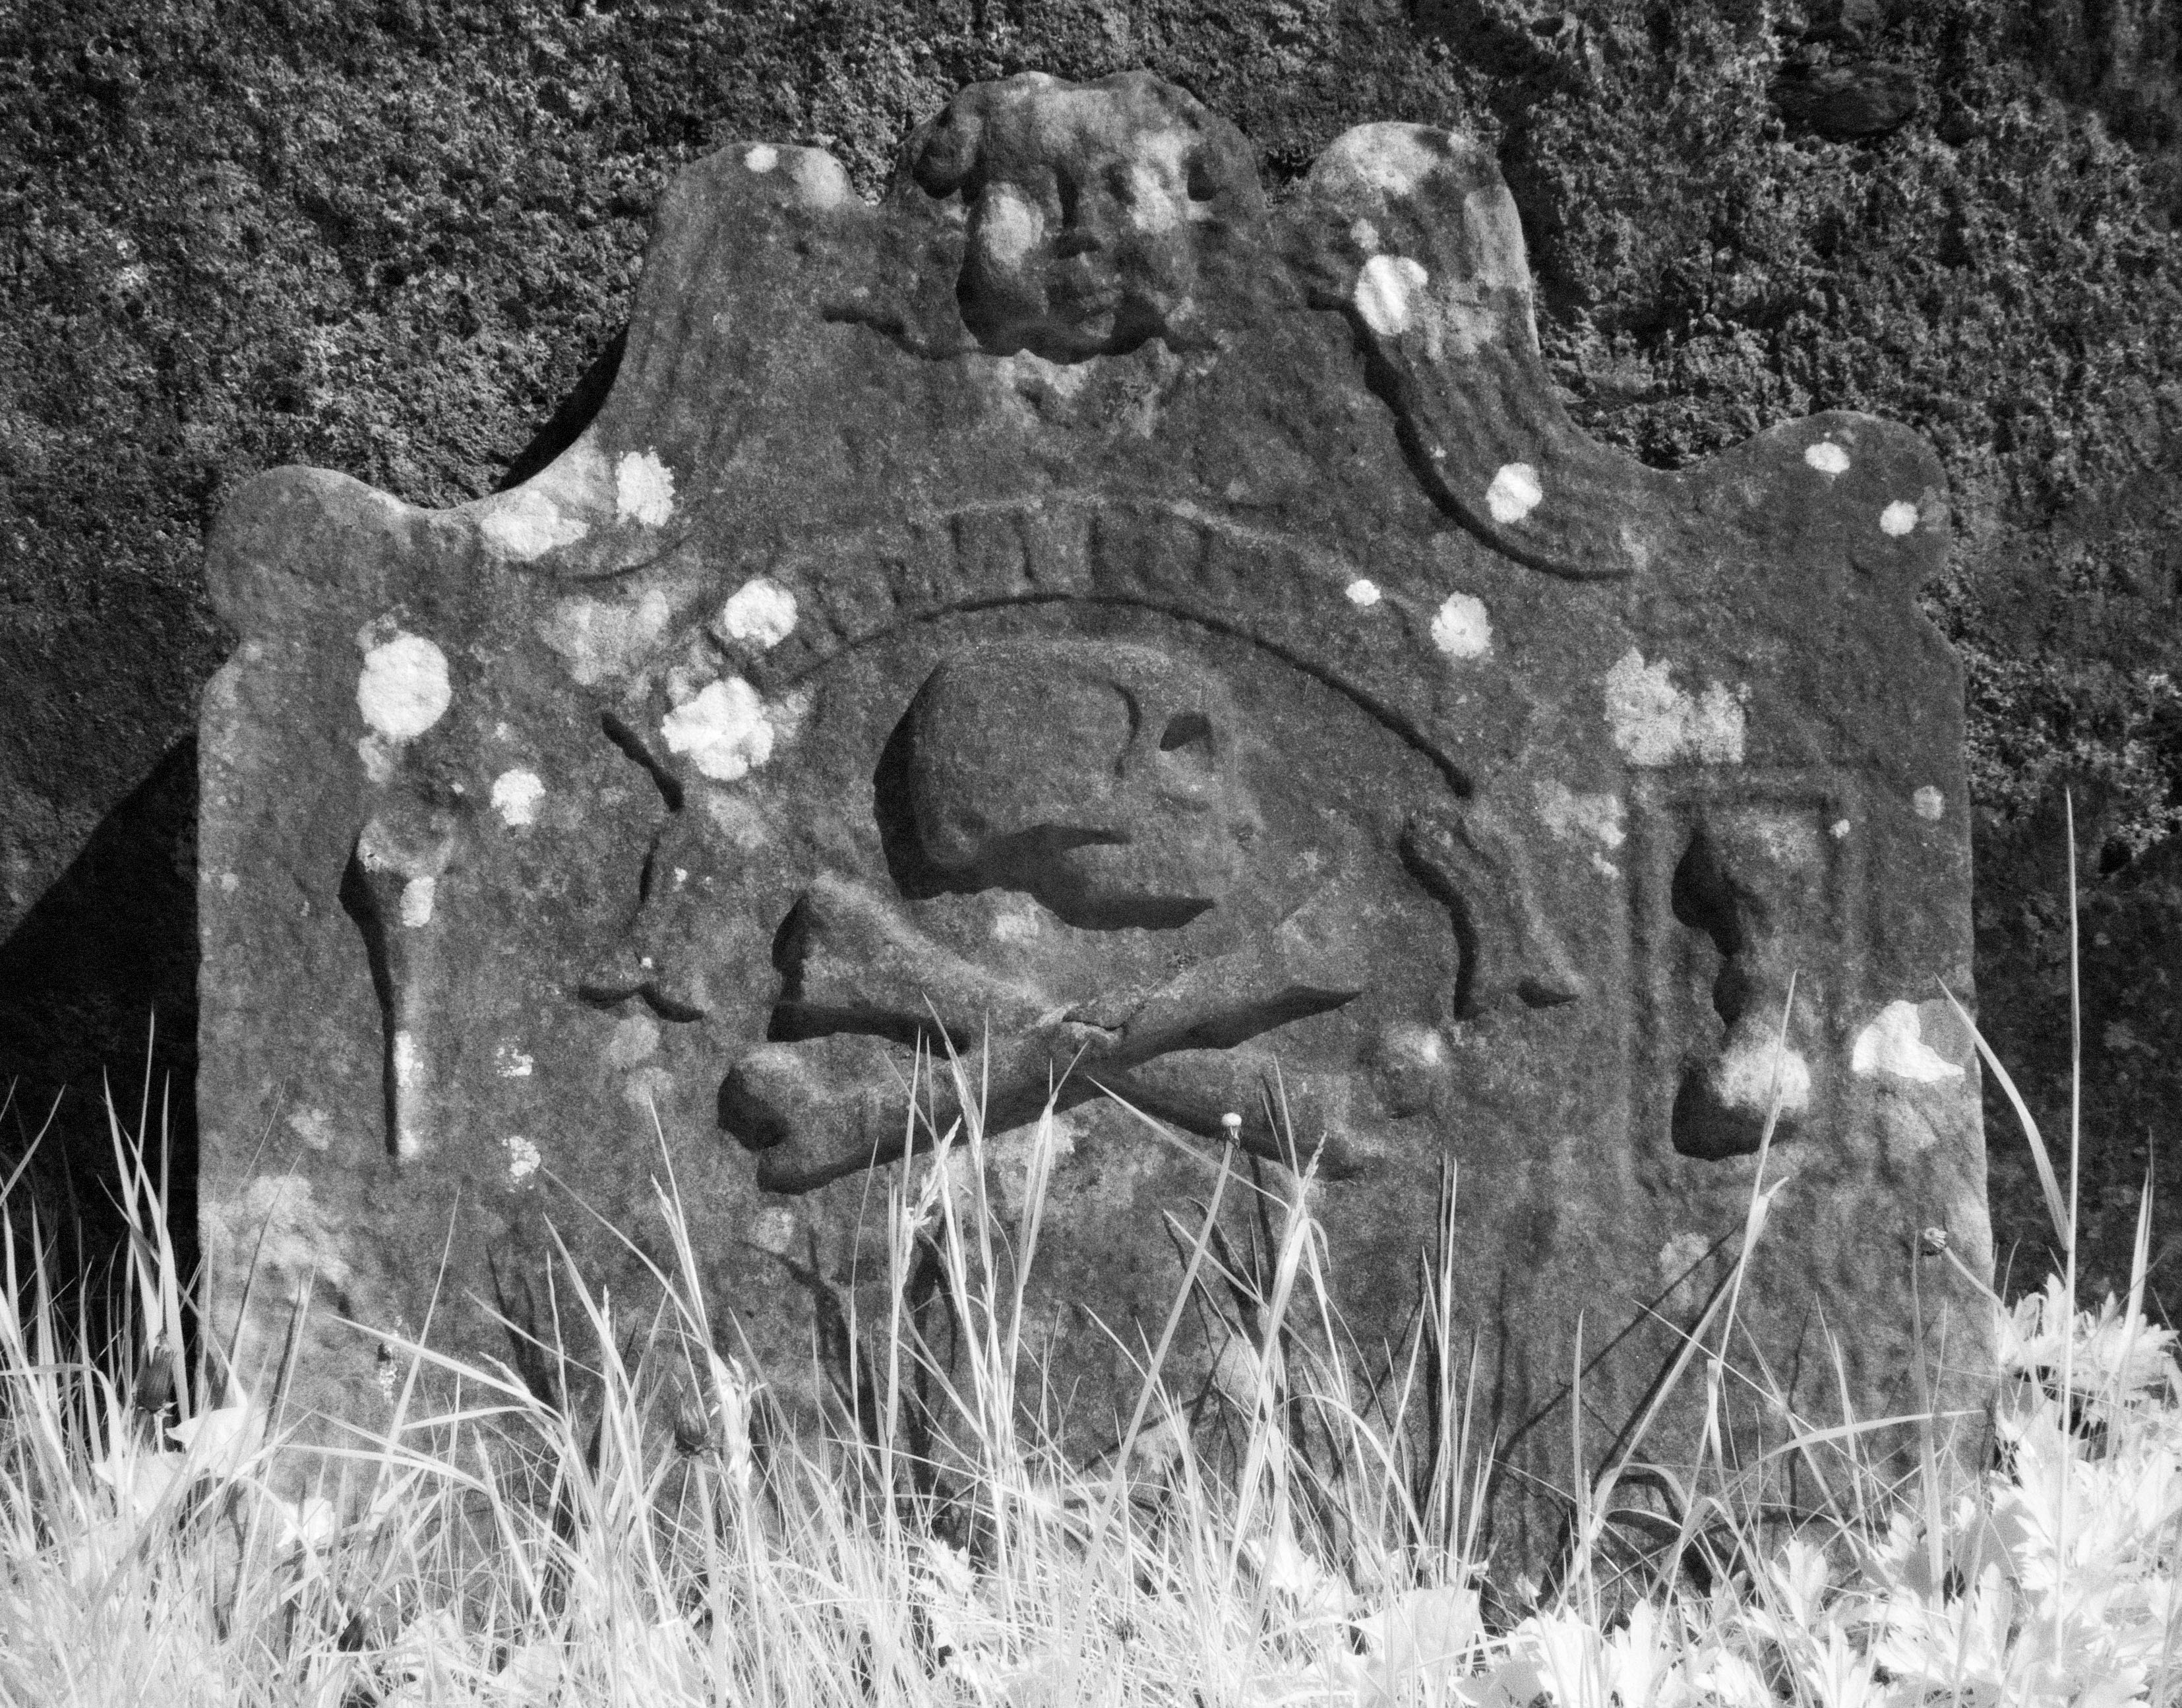 Old gravestone with skull and crossbones and an angel's head